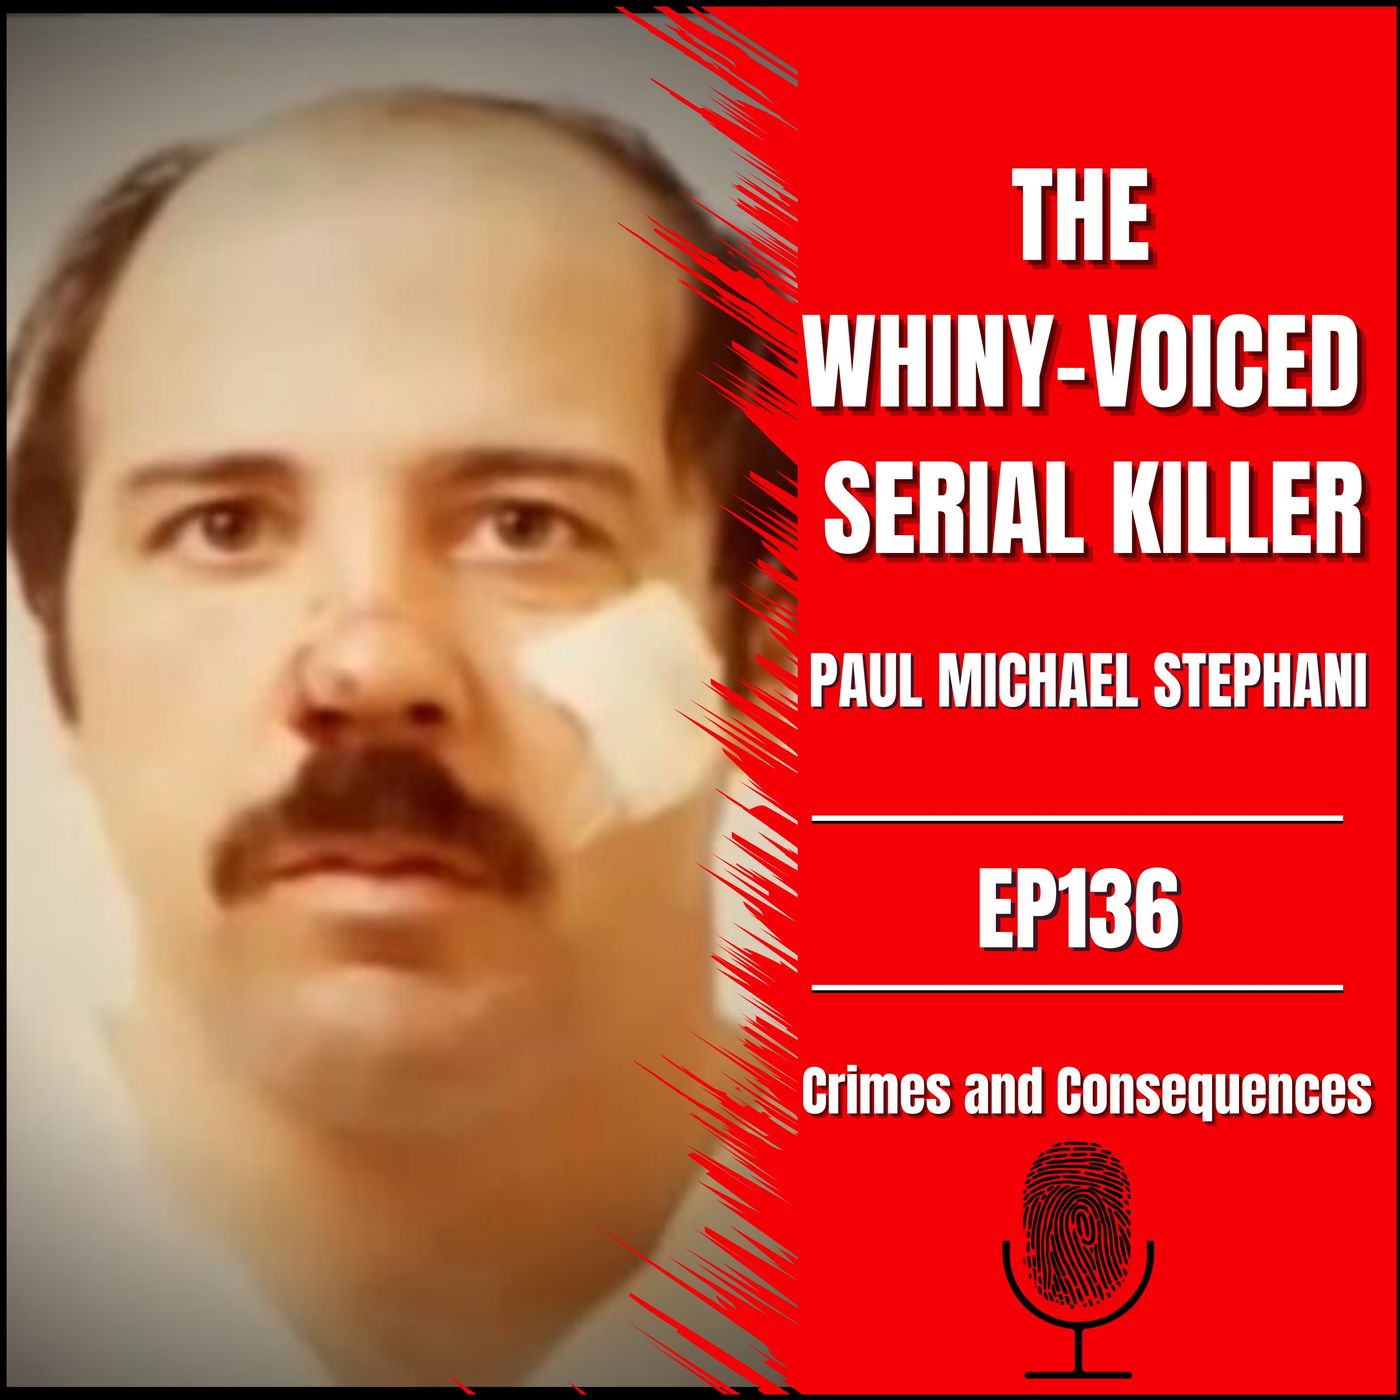 EP136: THE WHINY-VOICED SERIAL KILLER